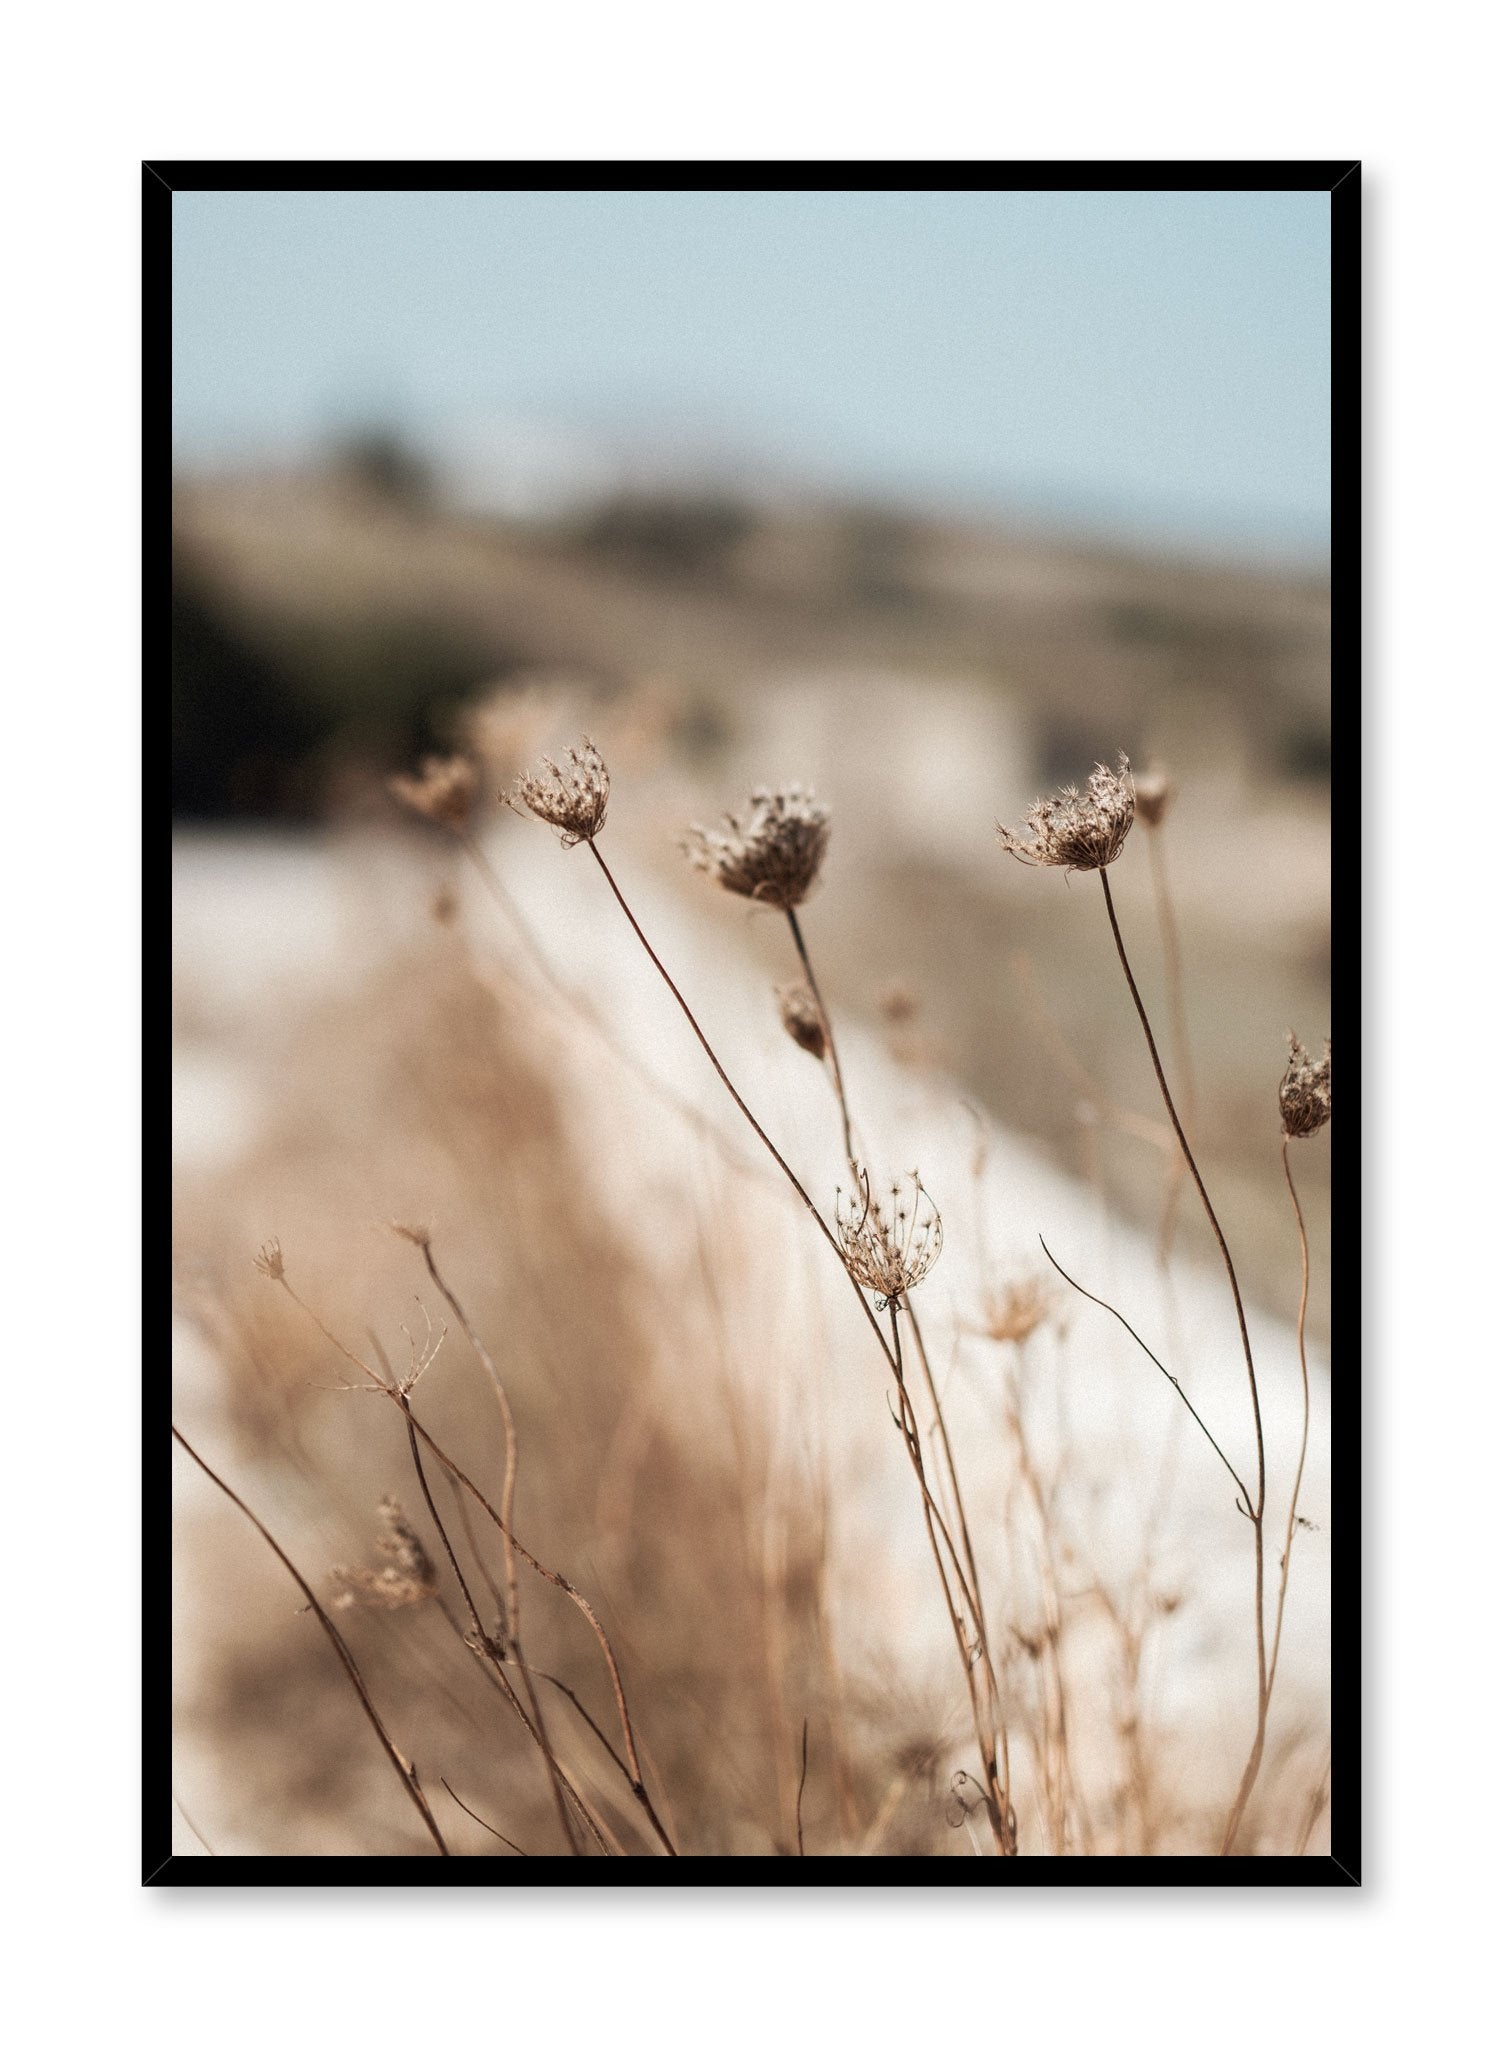 "Forest Bloom" is a botanical photography poster by Opposite Wall of cold climate flowers in natural meadow landscape.